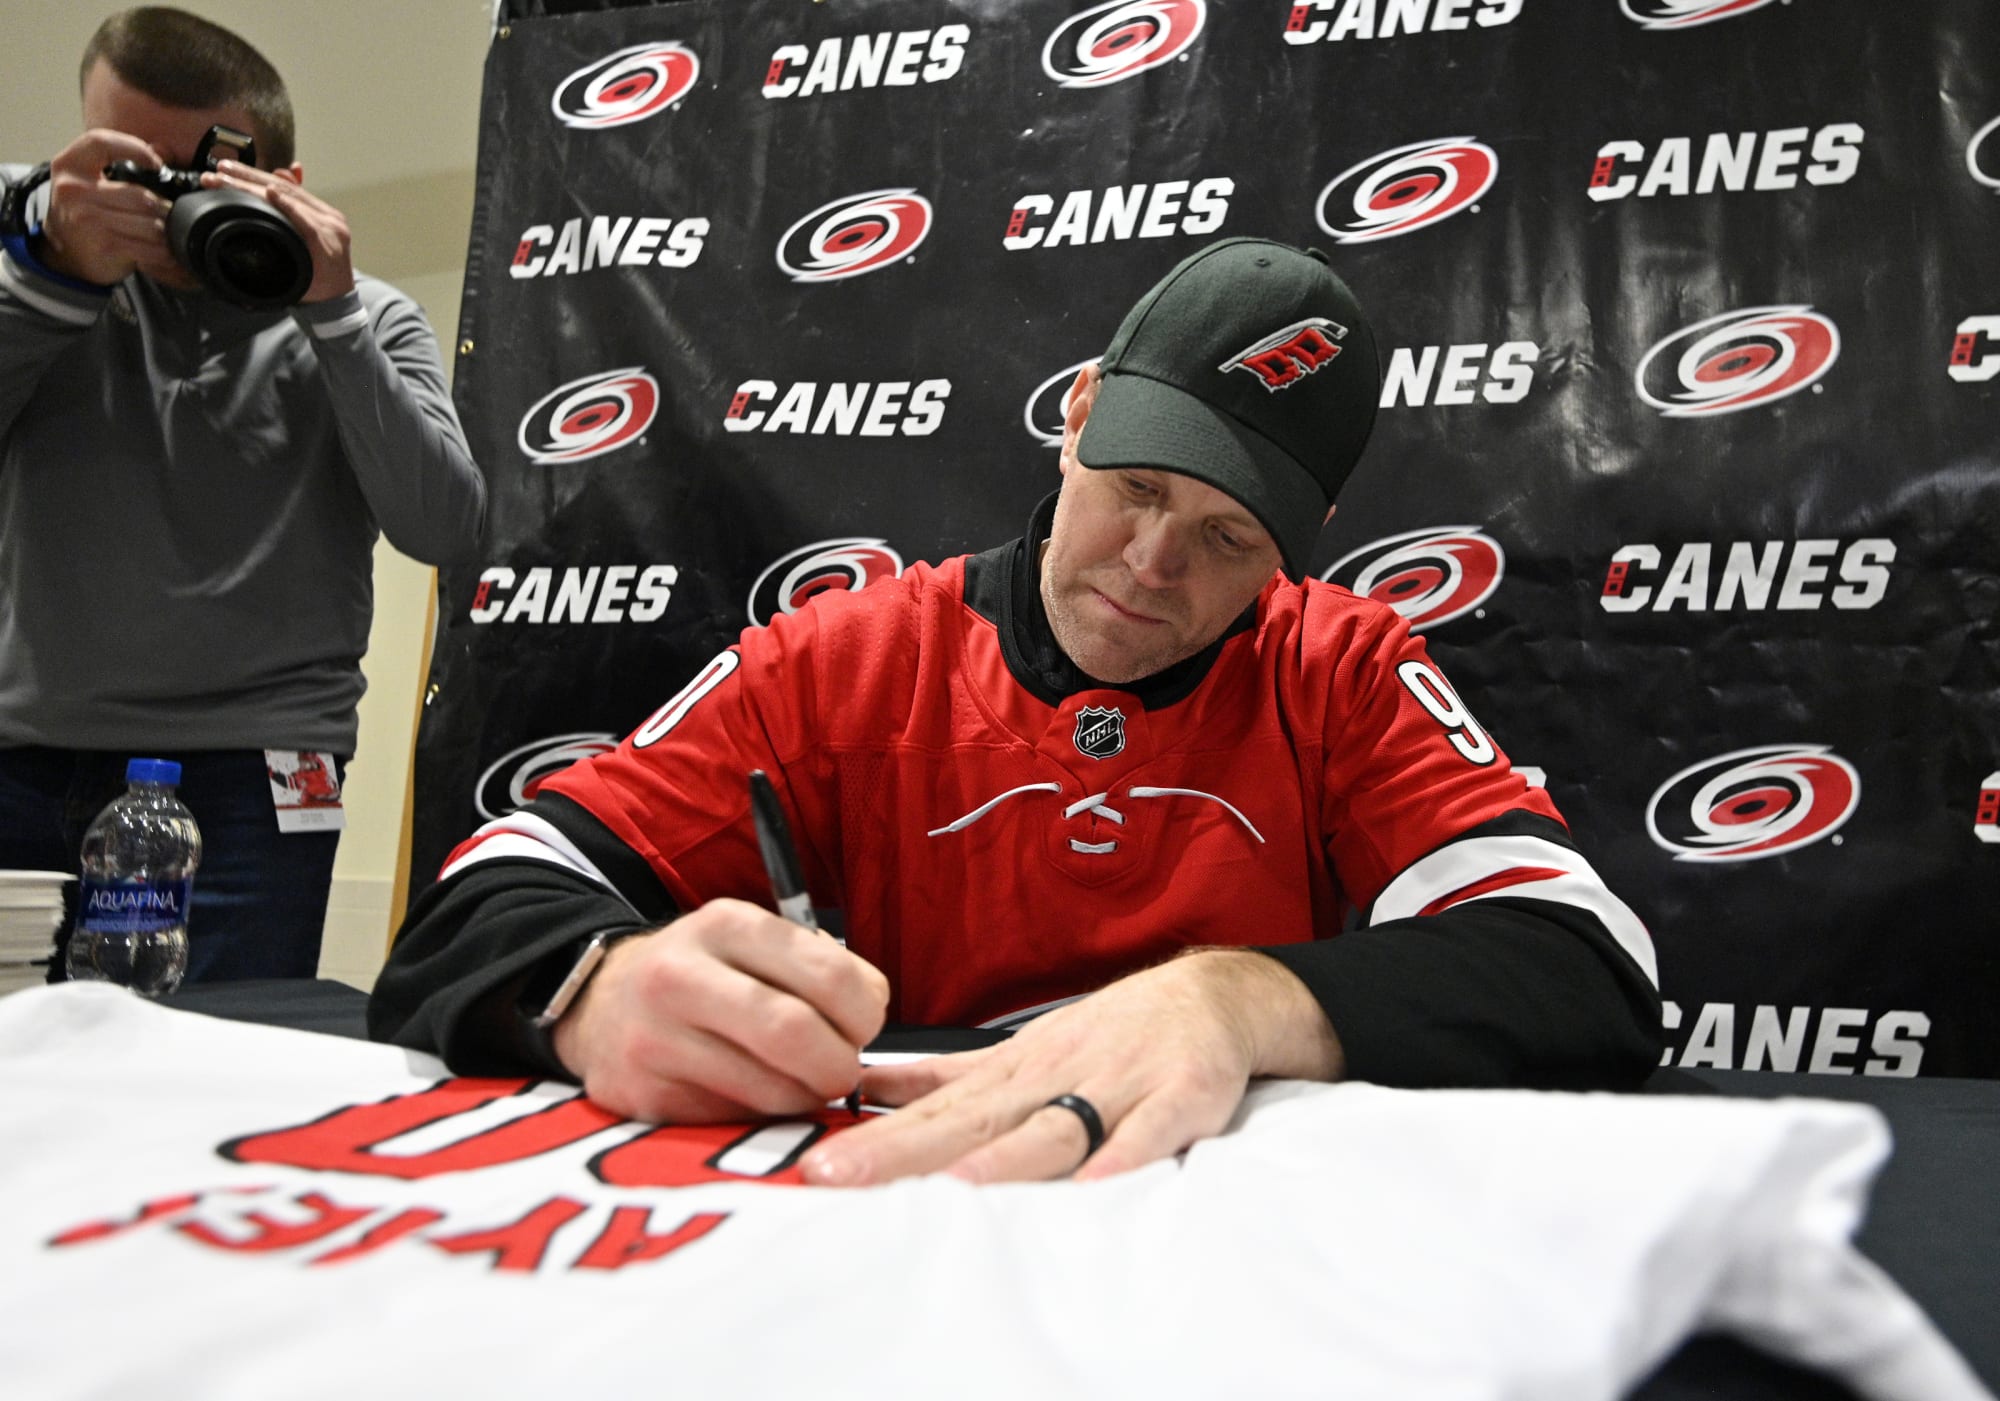 42-year-old pulled out of crowd to make NHL debut  and wins game, Carolina Hurricanes